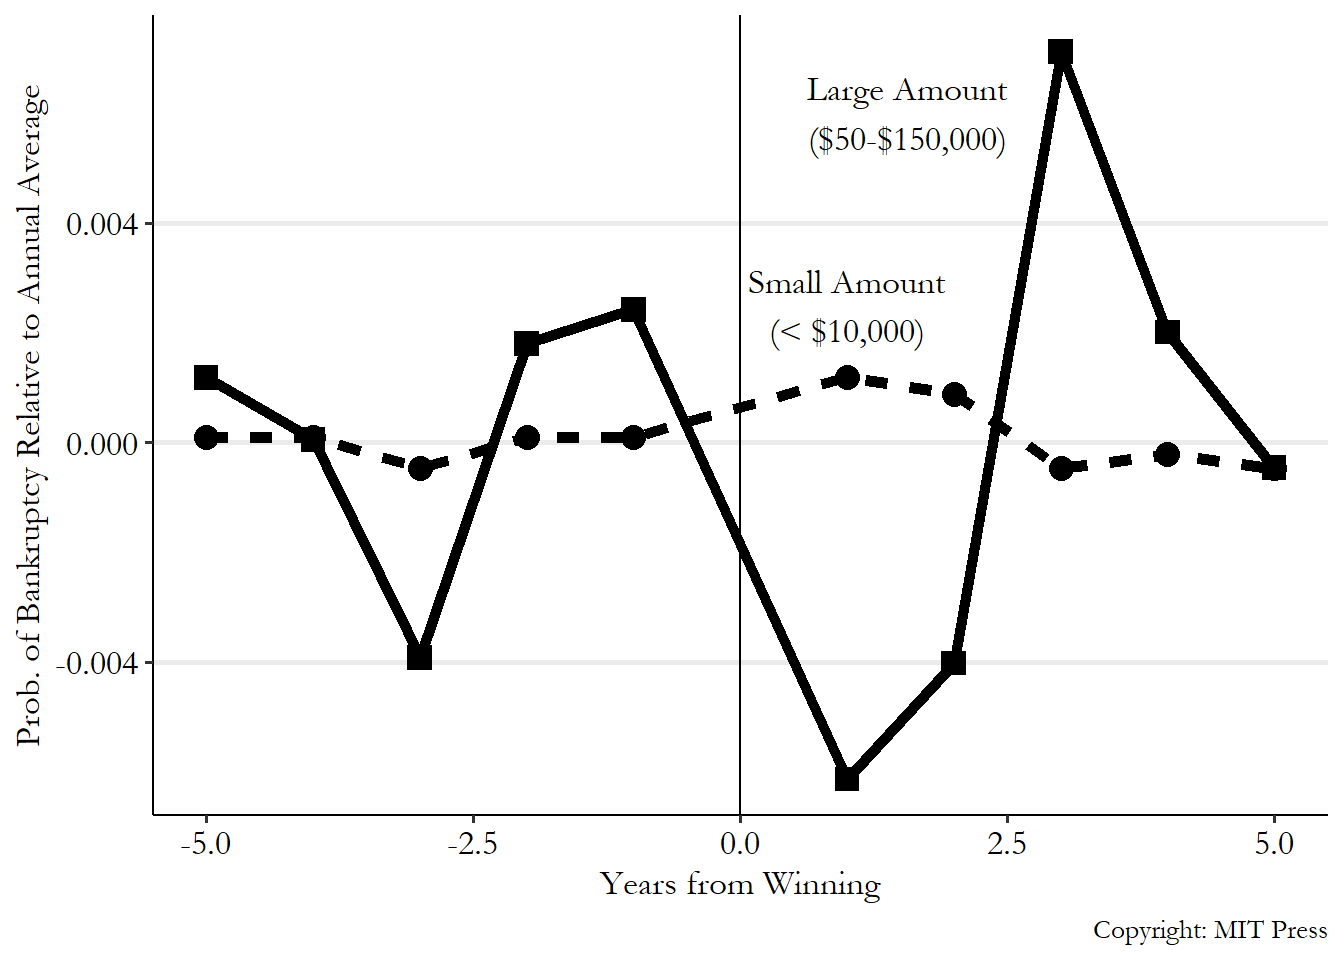 A graph showing bankruptcy rates in the years leading up to a lottery win and right after, comparing those who won small amounts against those who won large amounts. Bankruptcy seems unaffected by winning for small winners, but for big winners there's a reduction in bankruptcy right away, followed a few years later by a big increase.